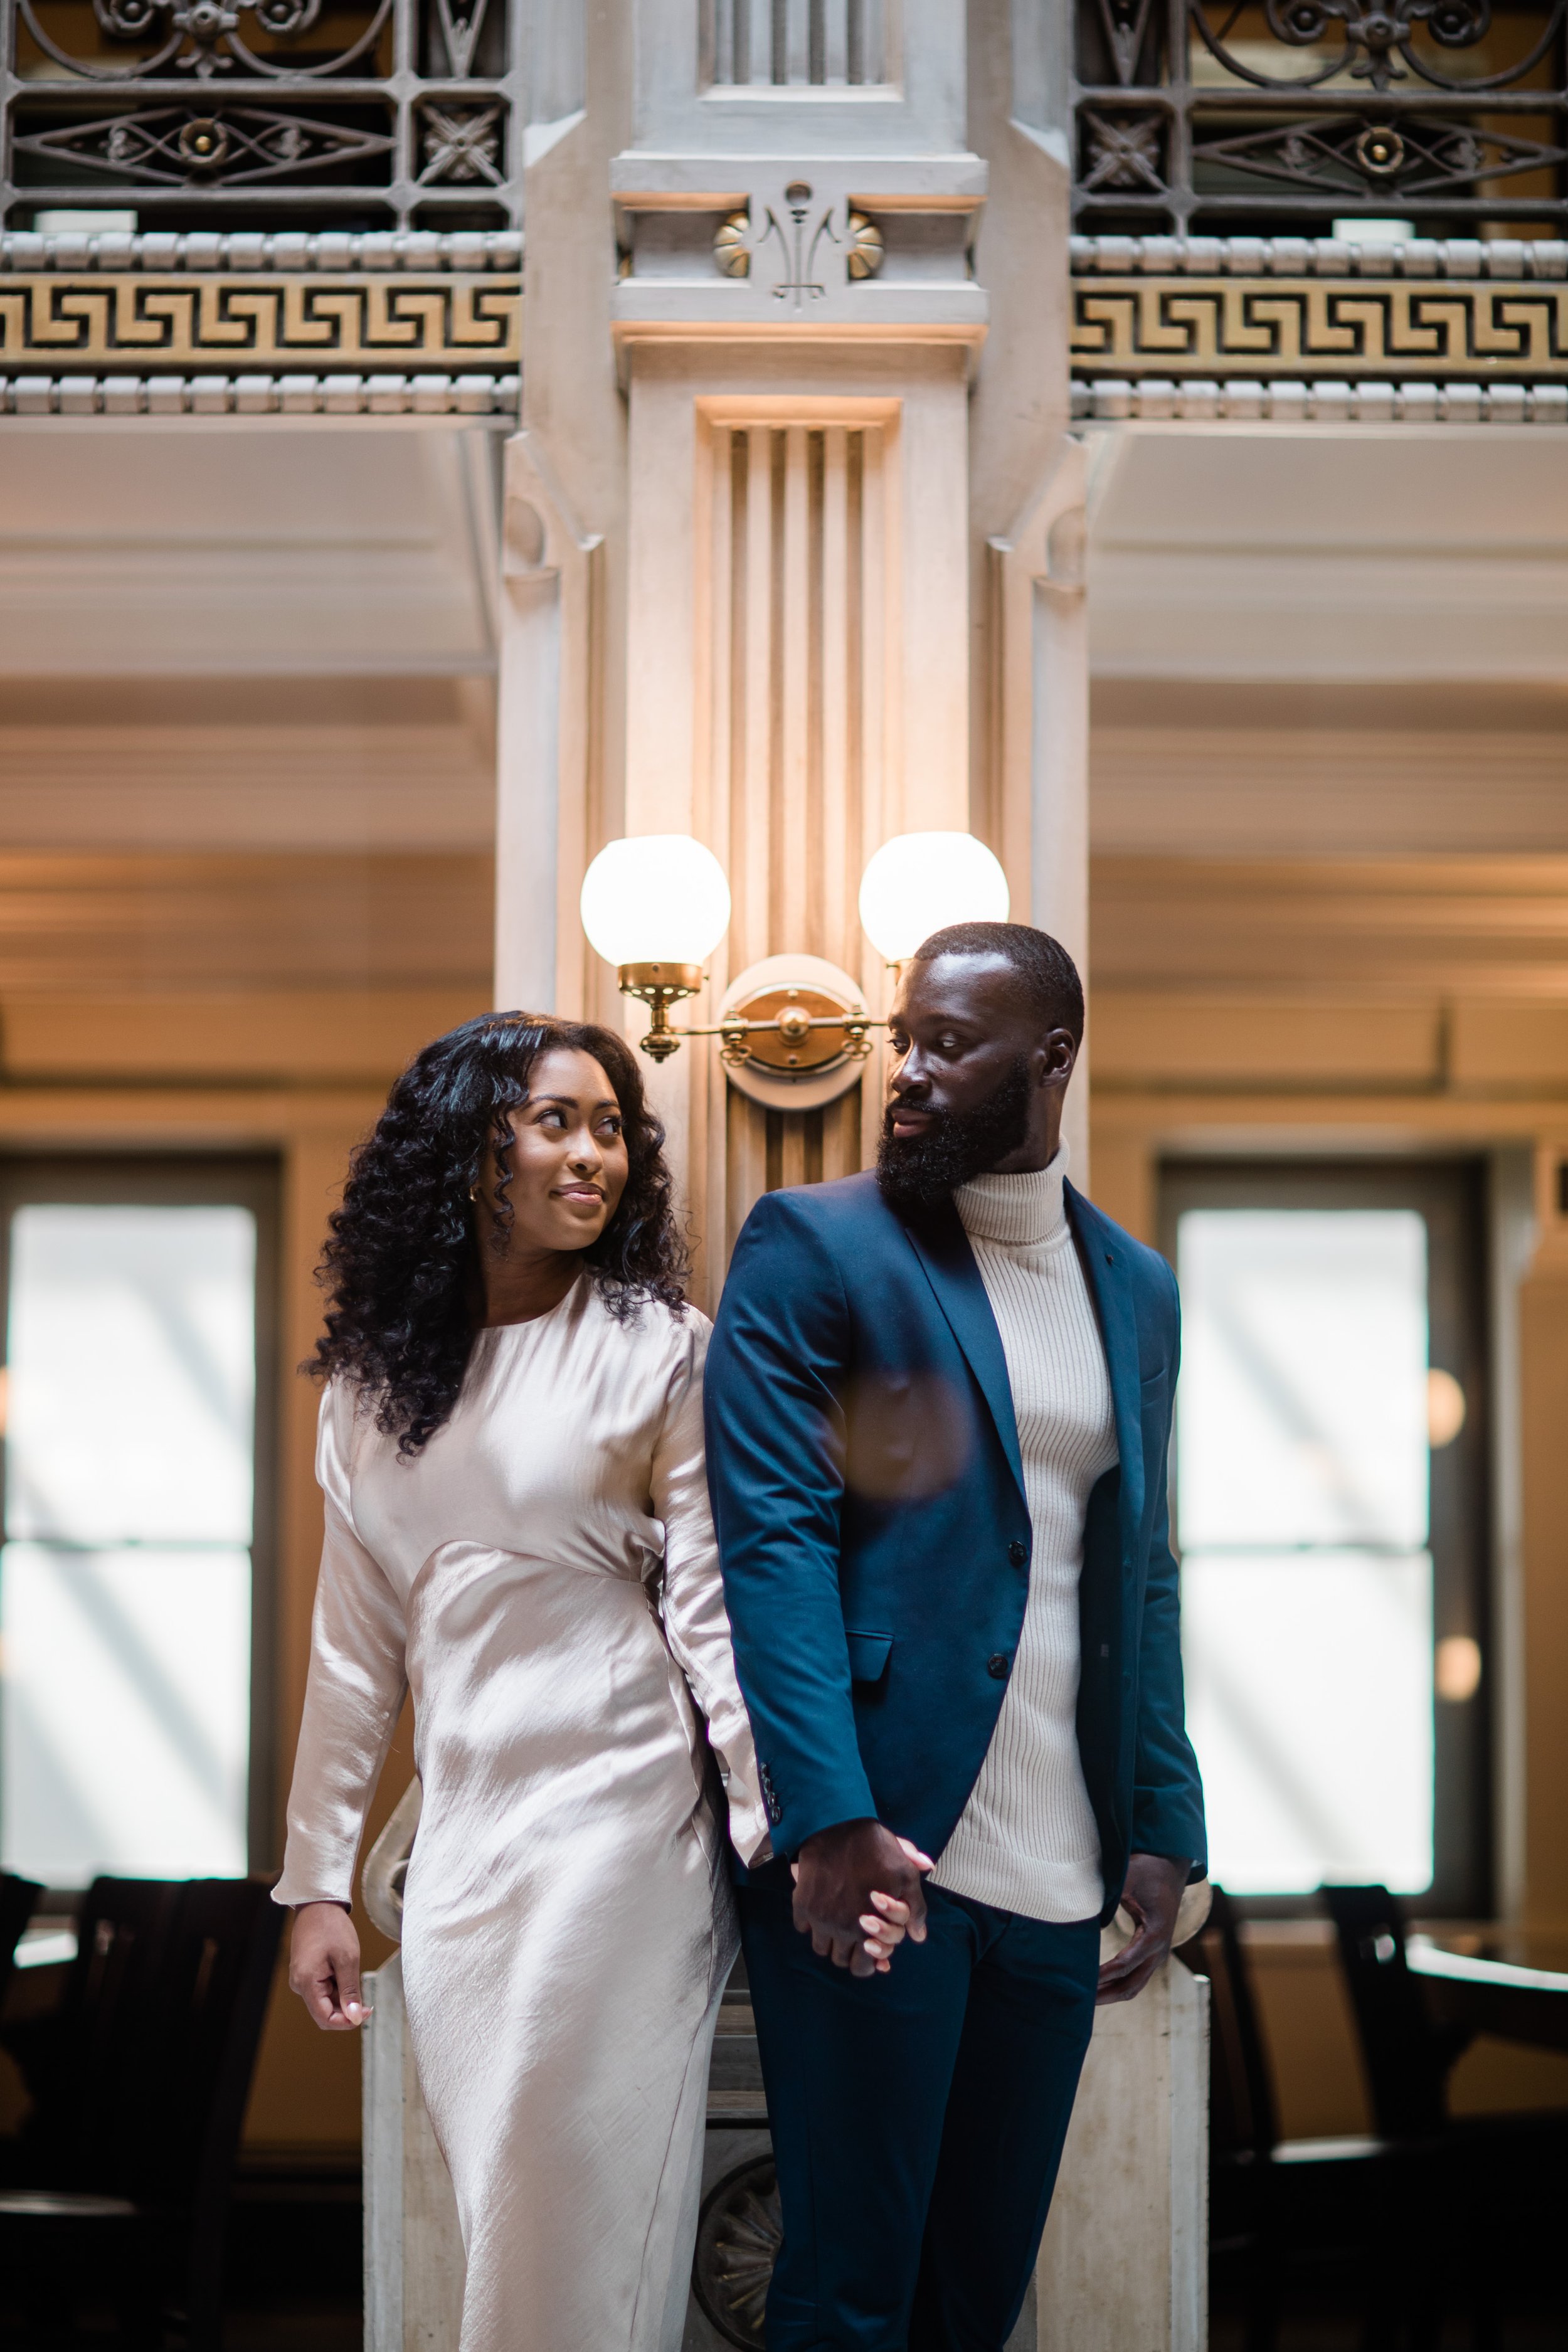 Disney Beauty and The Beast Inspired Engagement Session at The Peabody Library Baltimore Maryland shot by Megapixels Media Photography-27.jpg